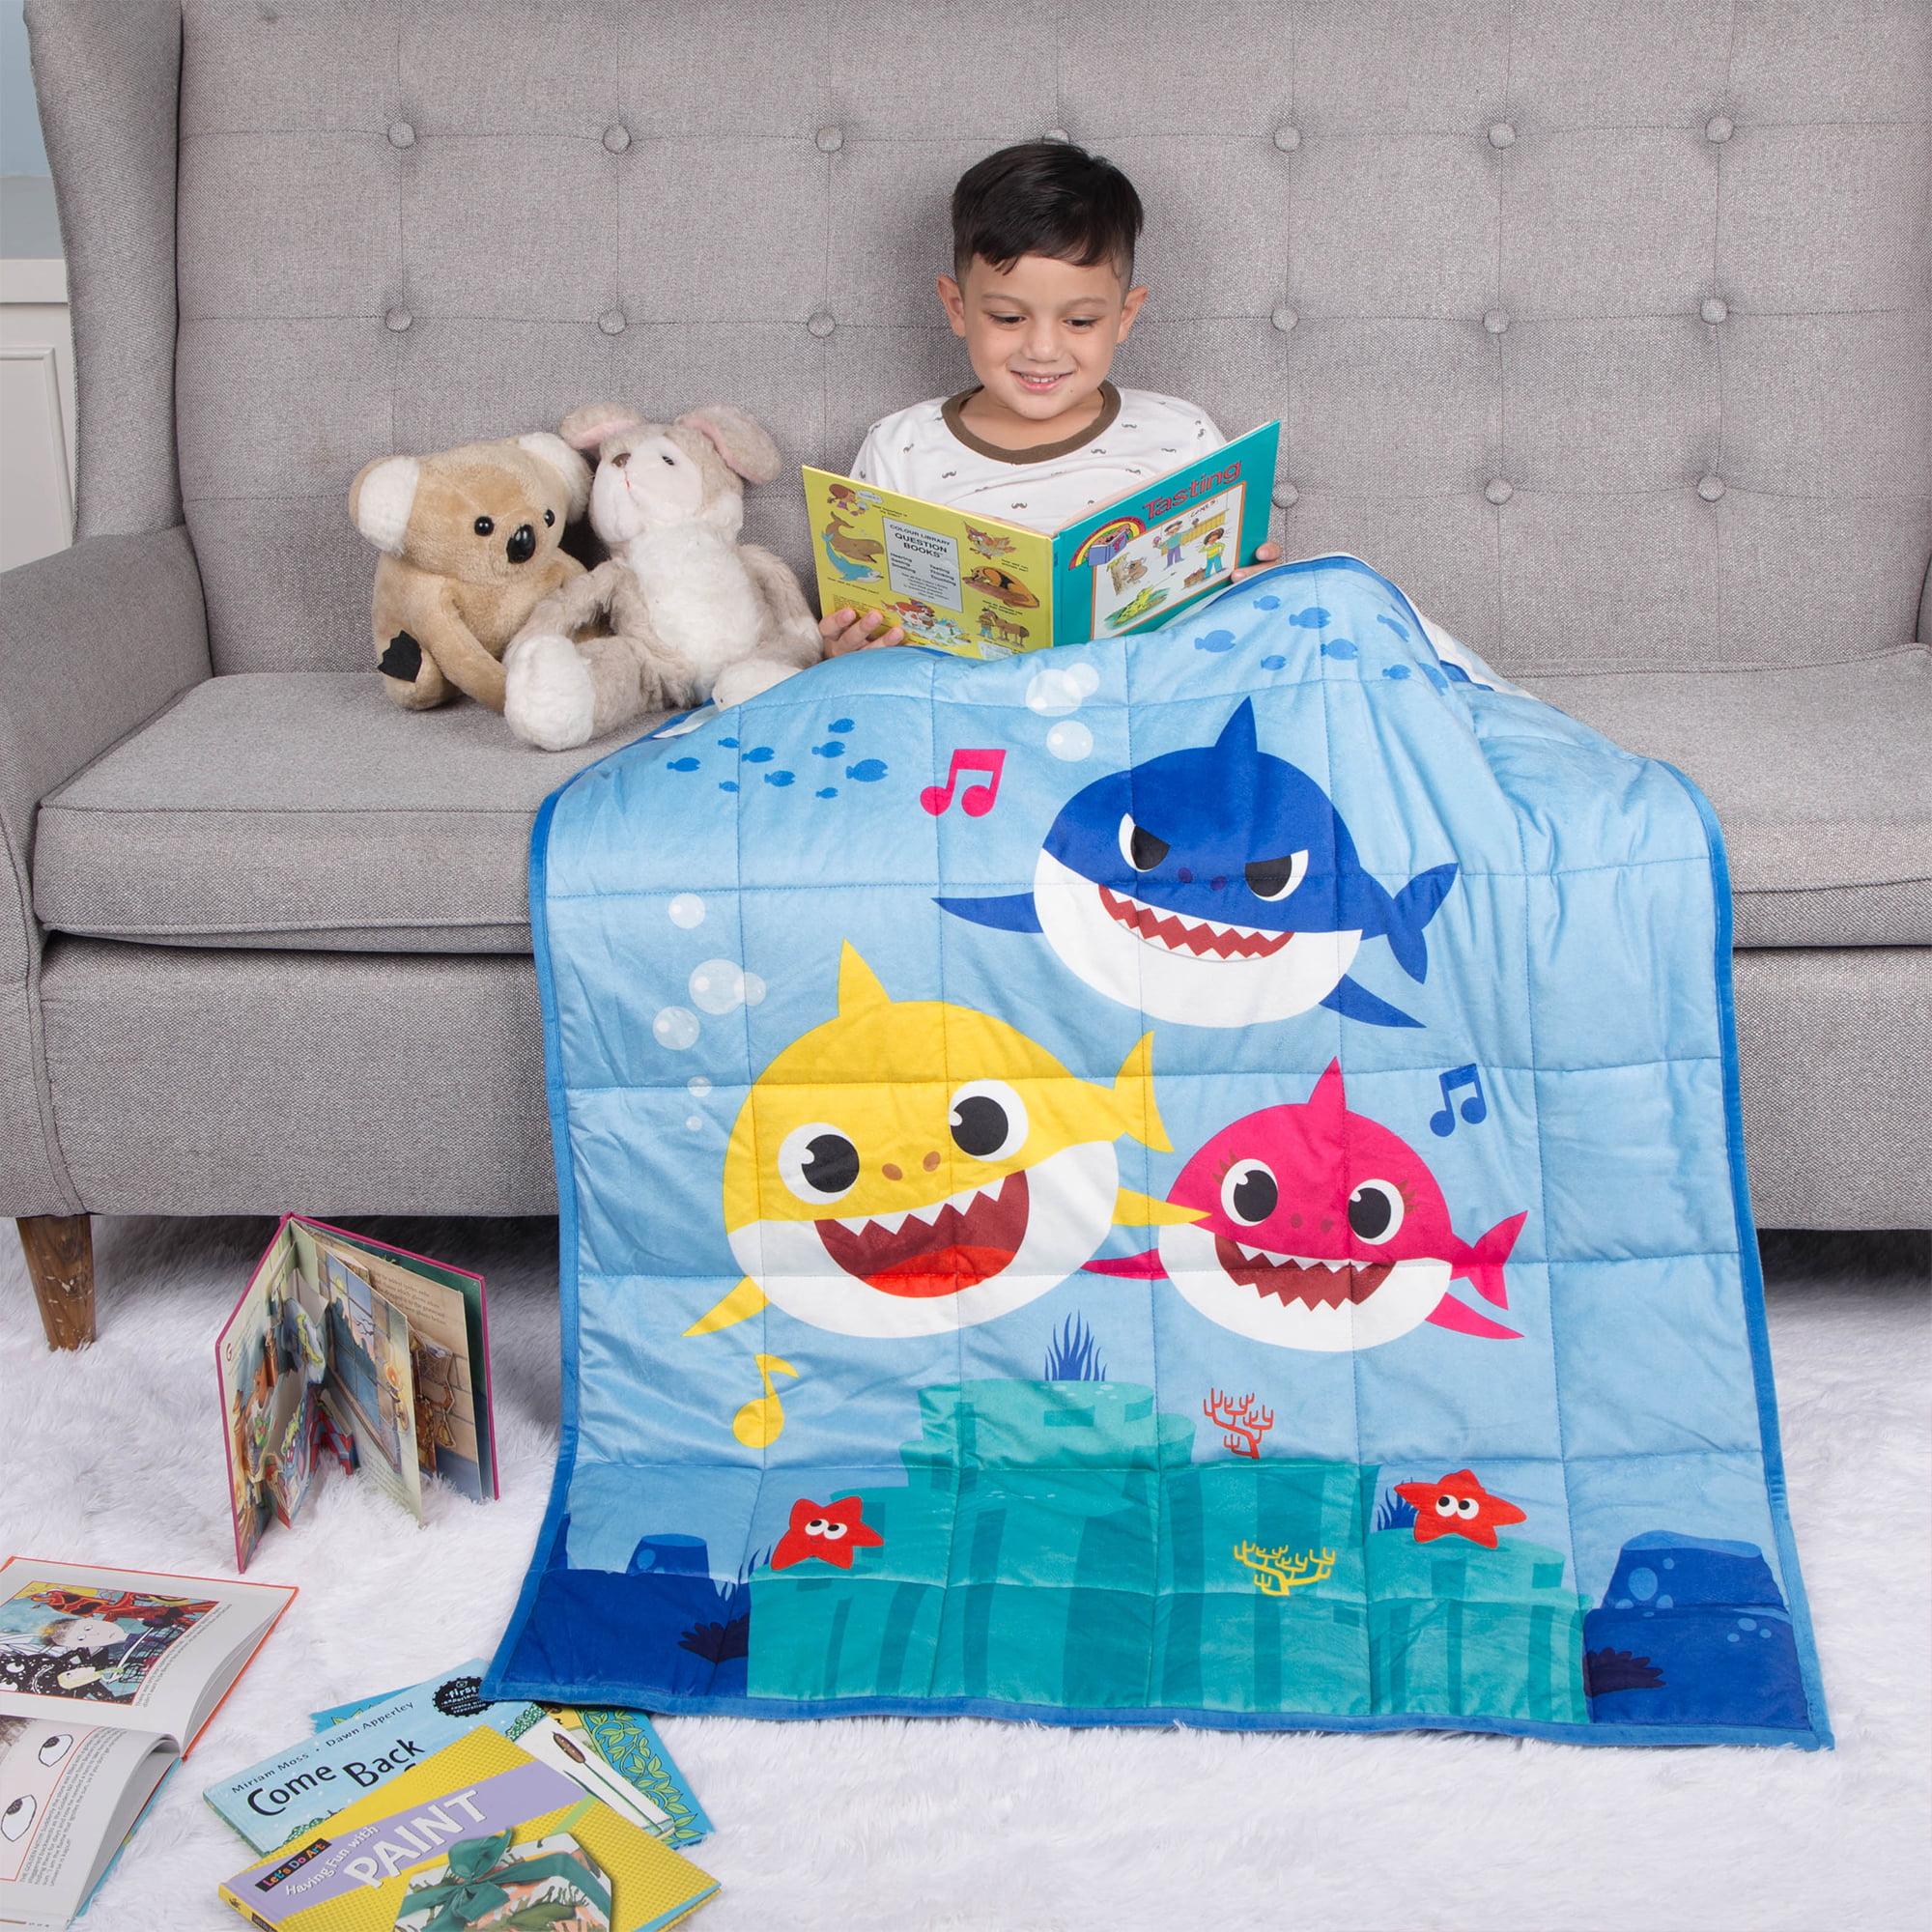 Baby shark Kids weighted blanket 4.5 lbs NEW 